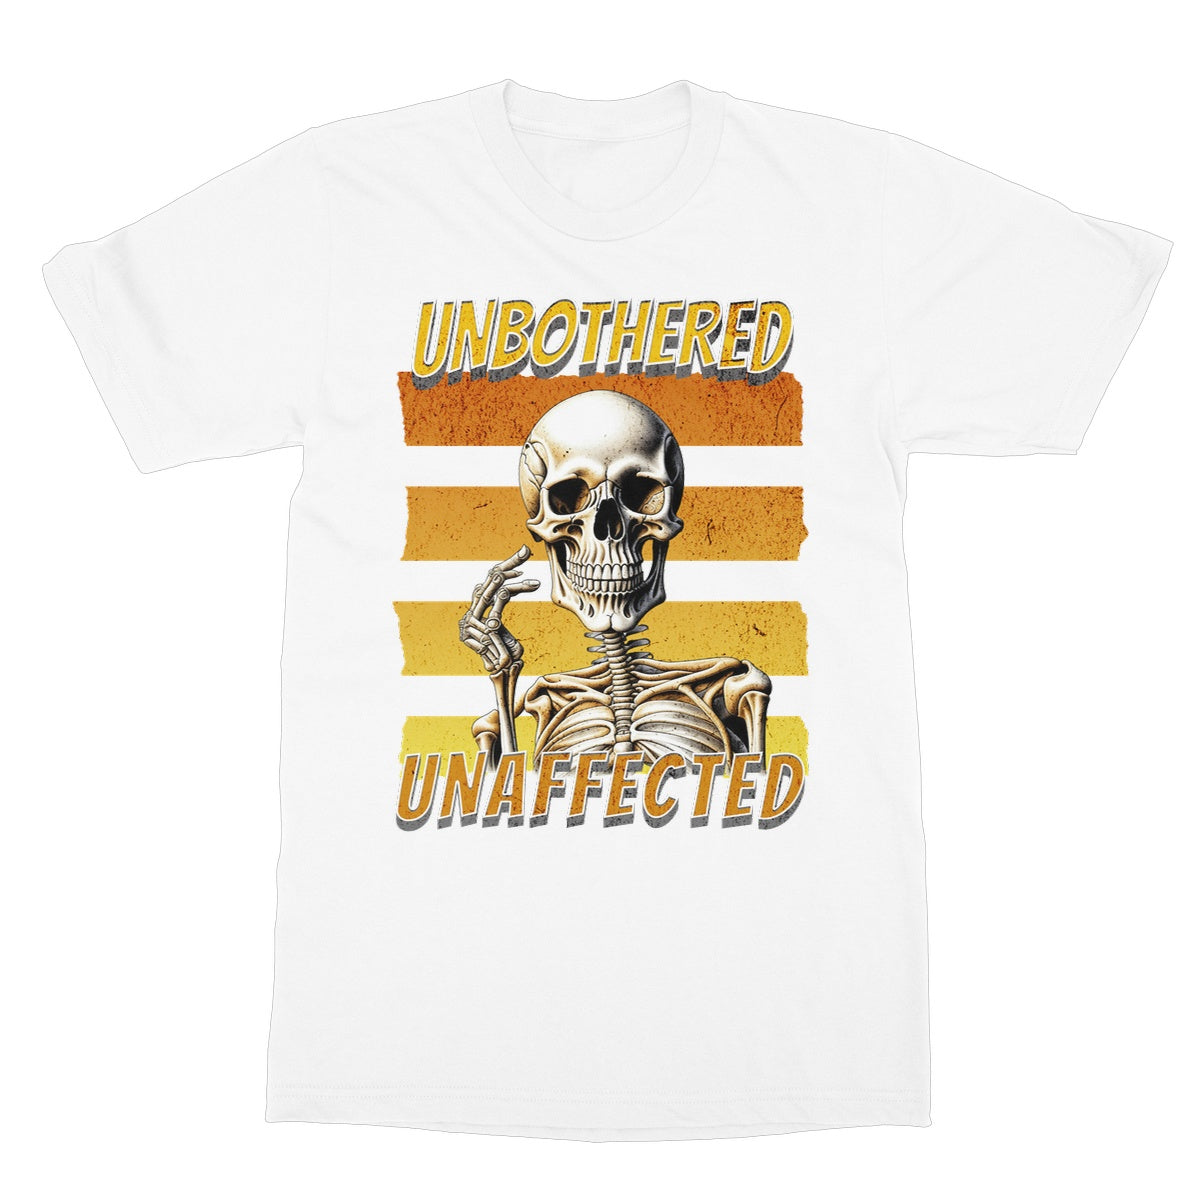 unbothered unaffected t shirt white